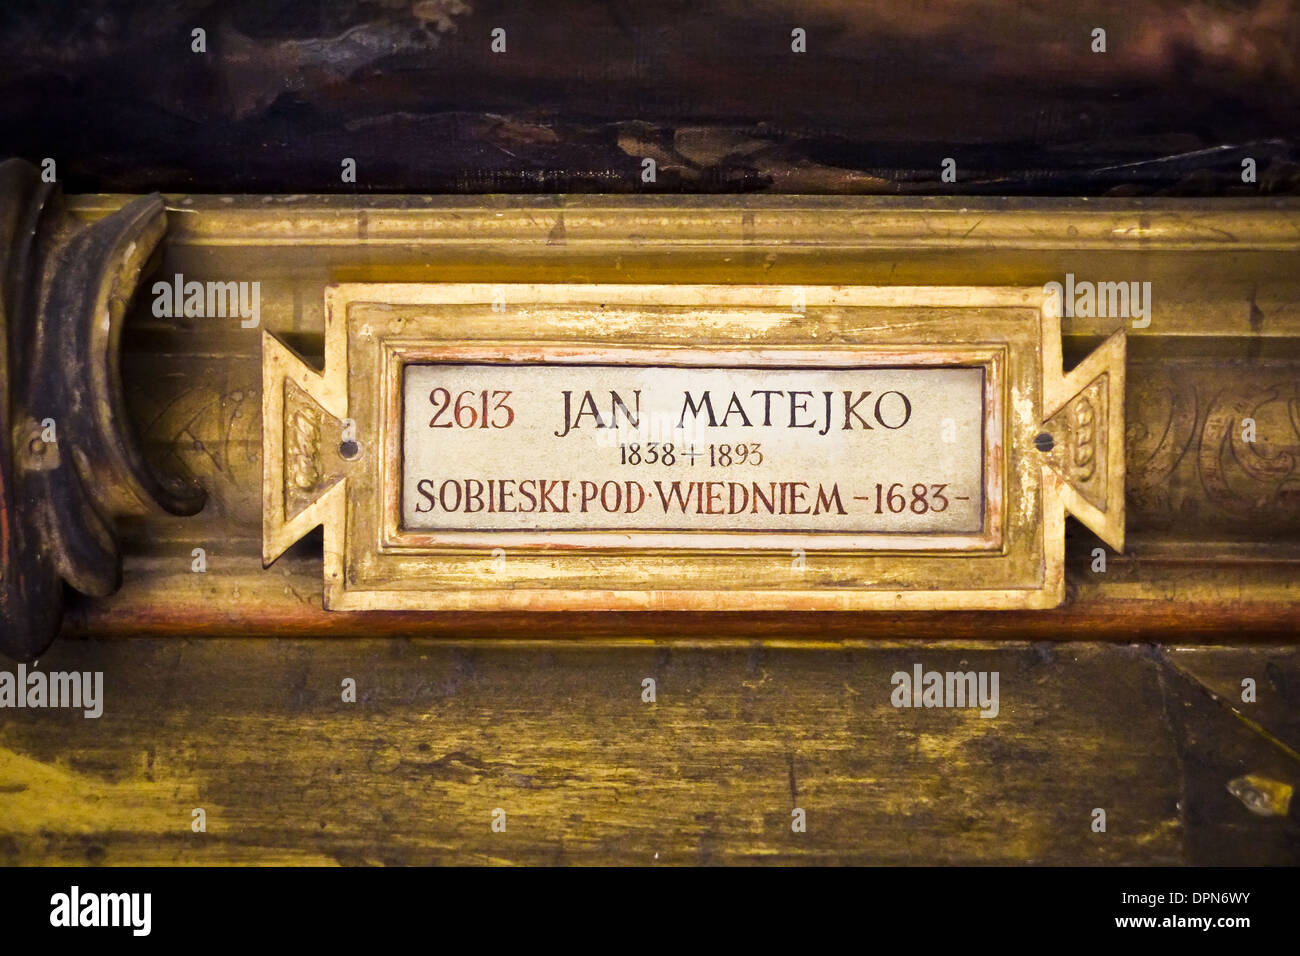 Jan Matejko Vienna High Resolution Stock Photography and Images - Alamy